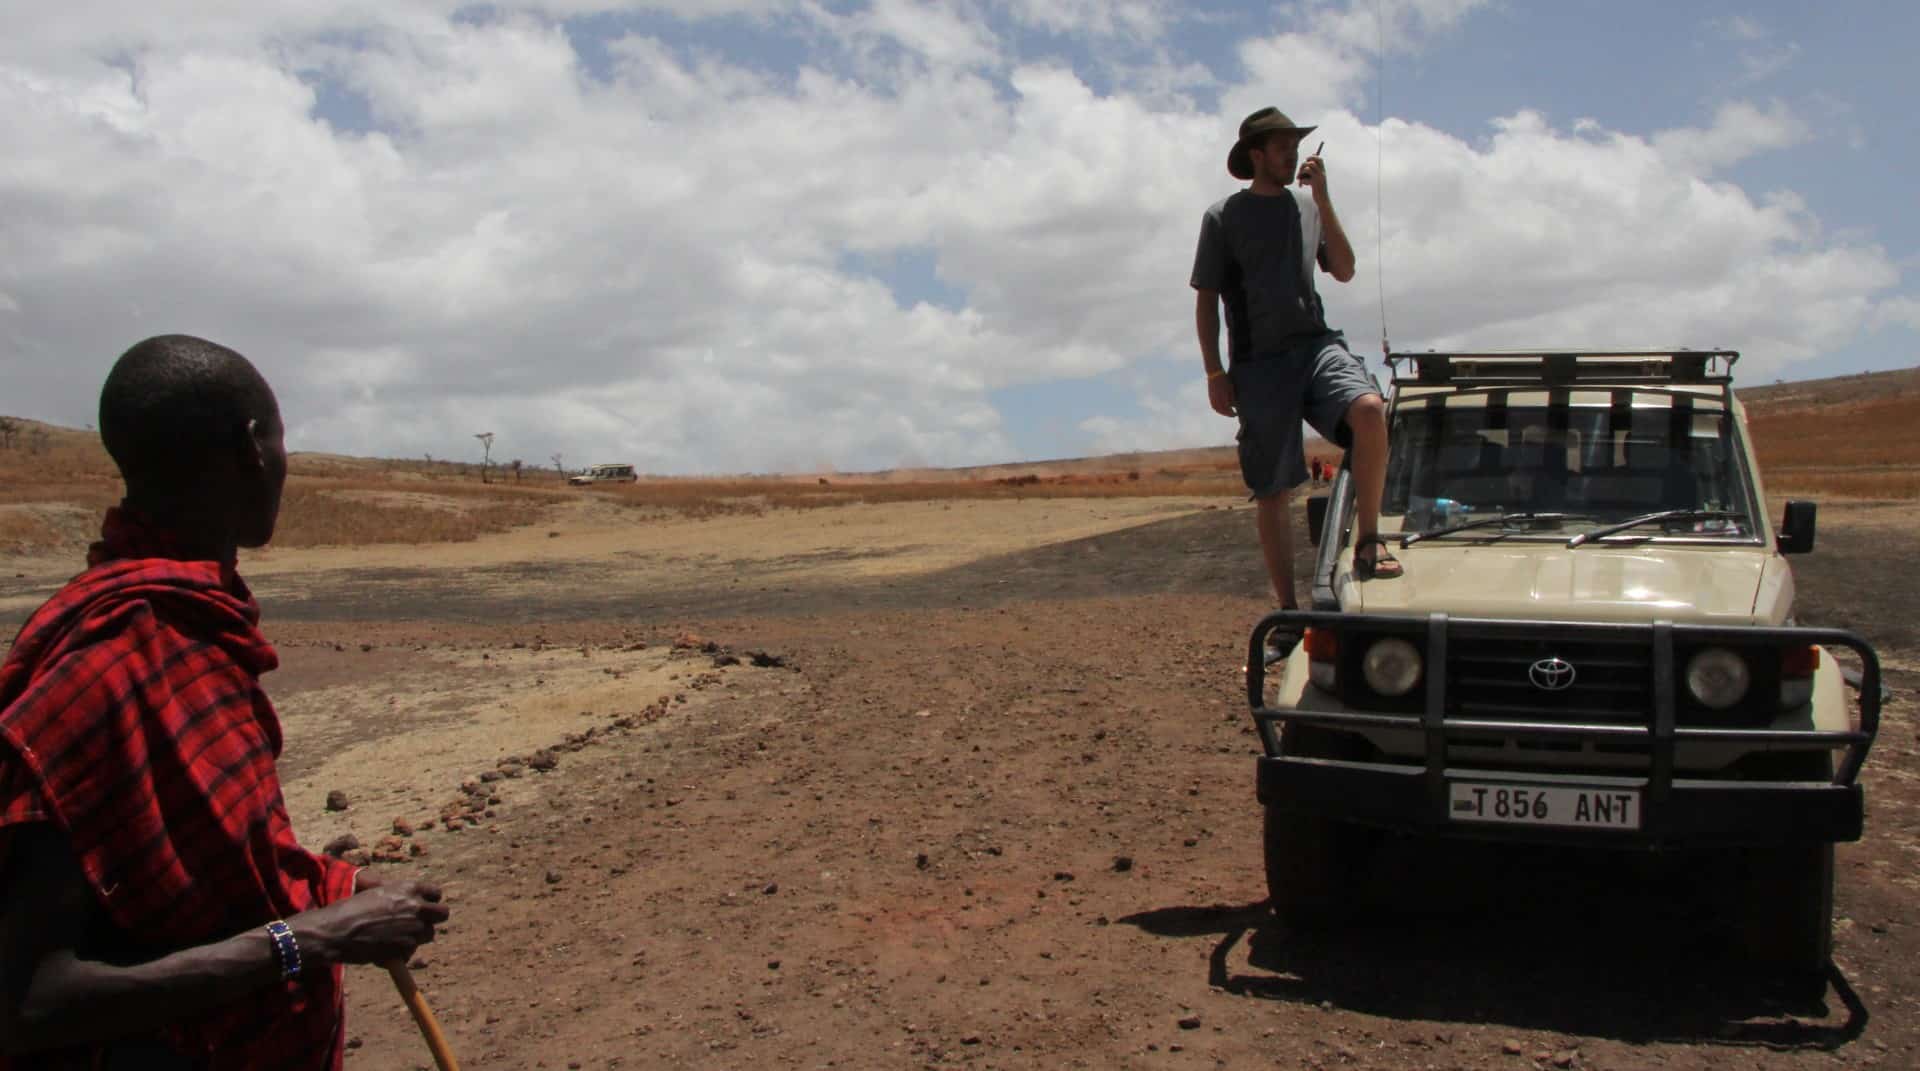 Best things to do in Arusha Tanzania - Scott Brills - Talking on a walky talky while on safari